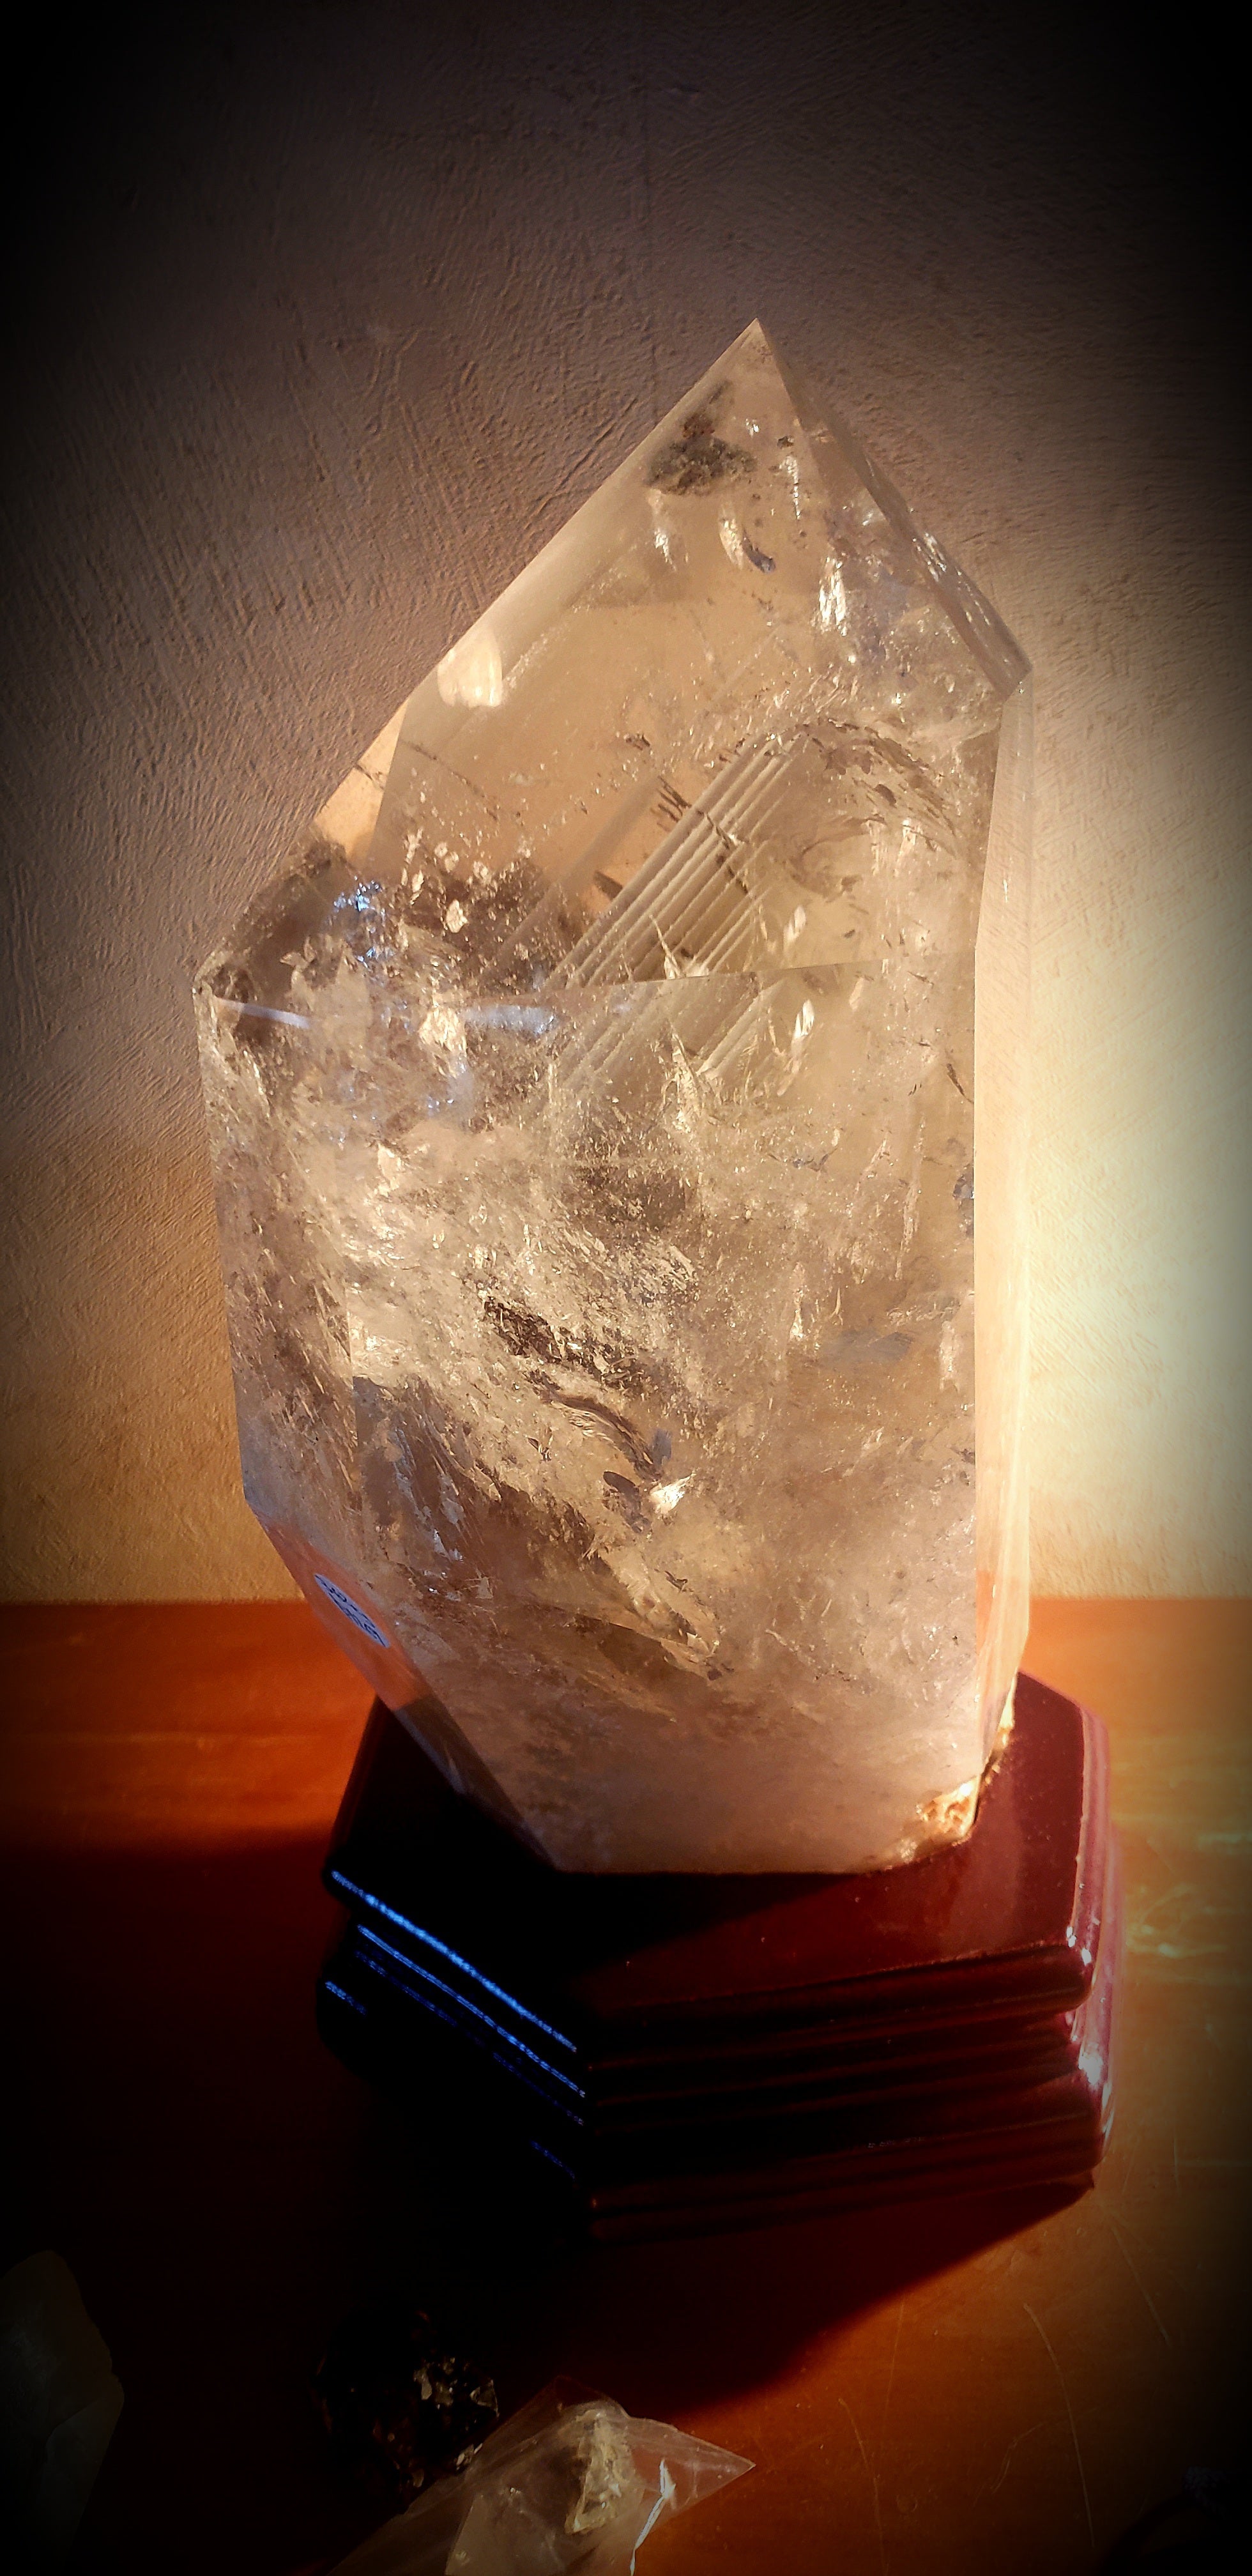 Large polished quartz with heaps phantoms and inclusions - 3.6kg